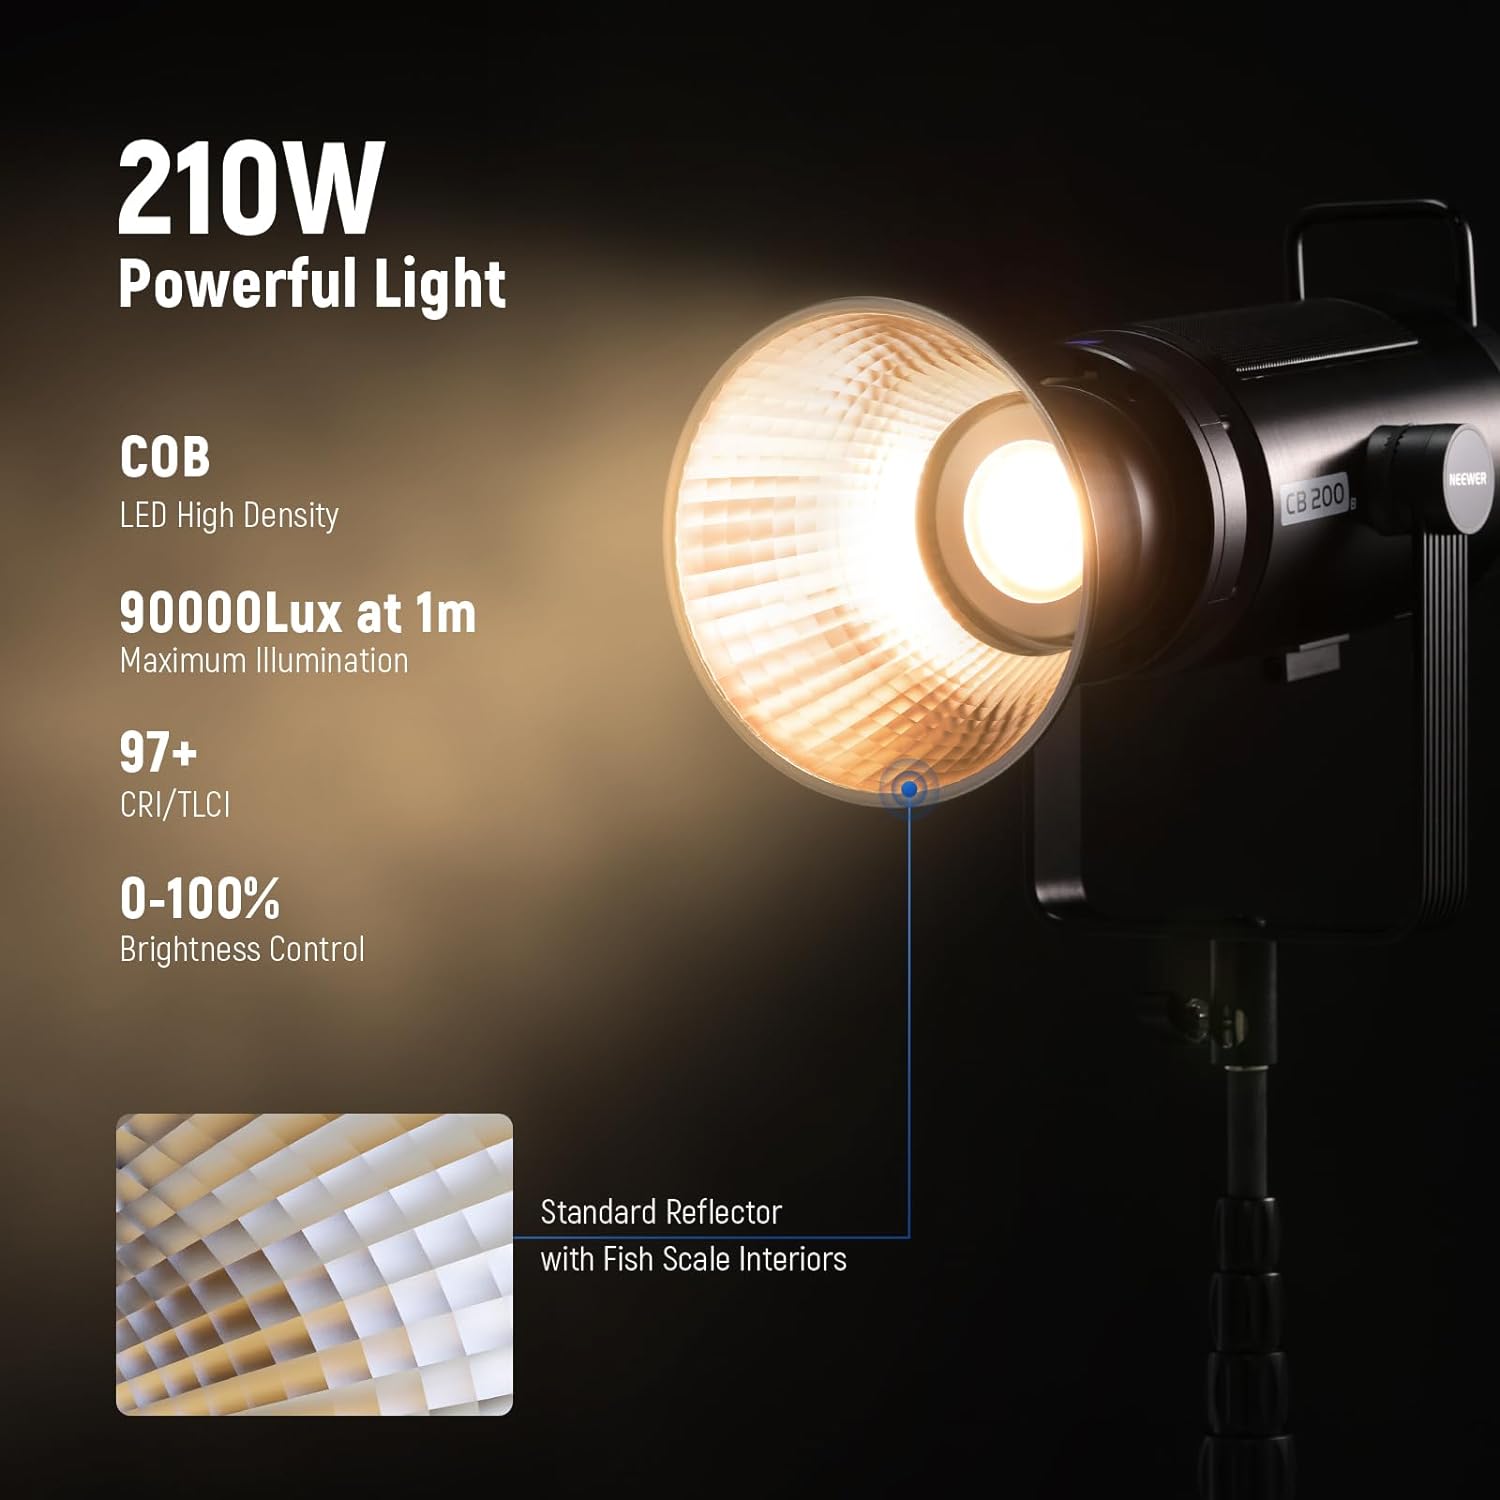 NEEWER CB200B Bi-Color 210W Continuous LED Light - NEEWER